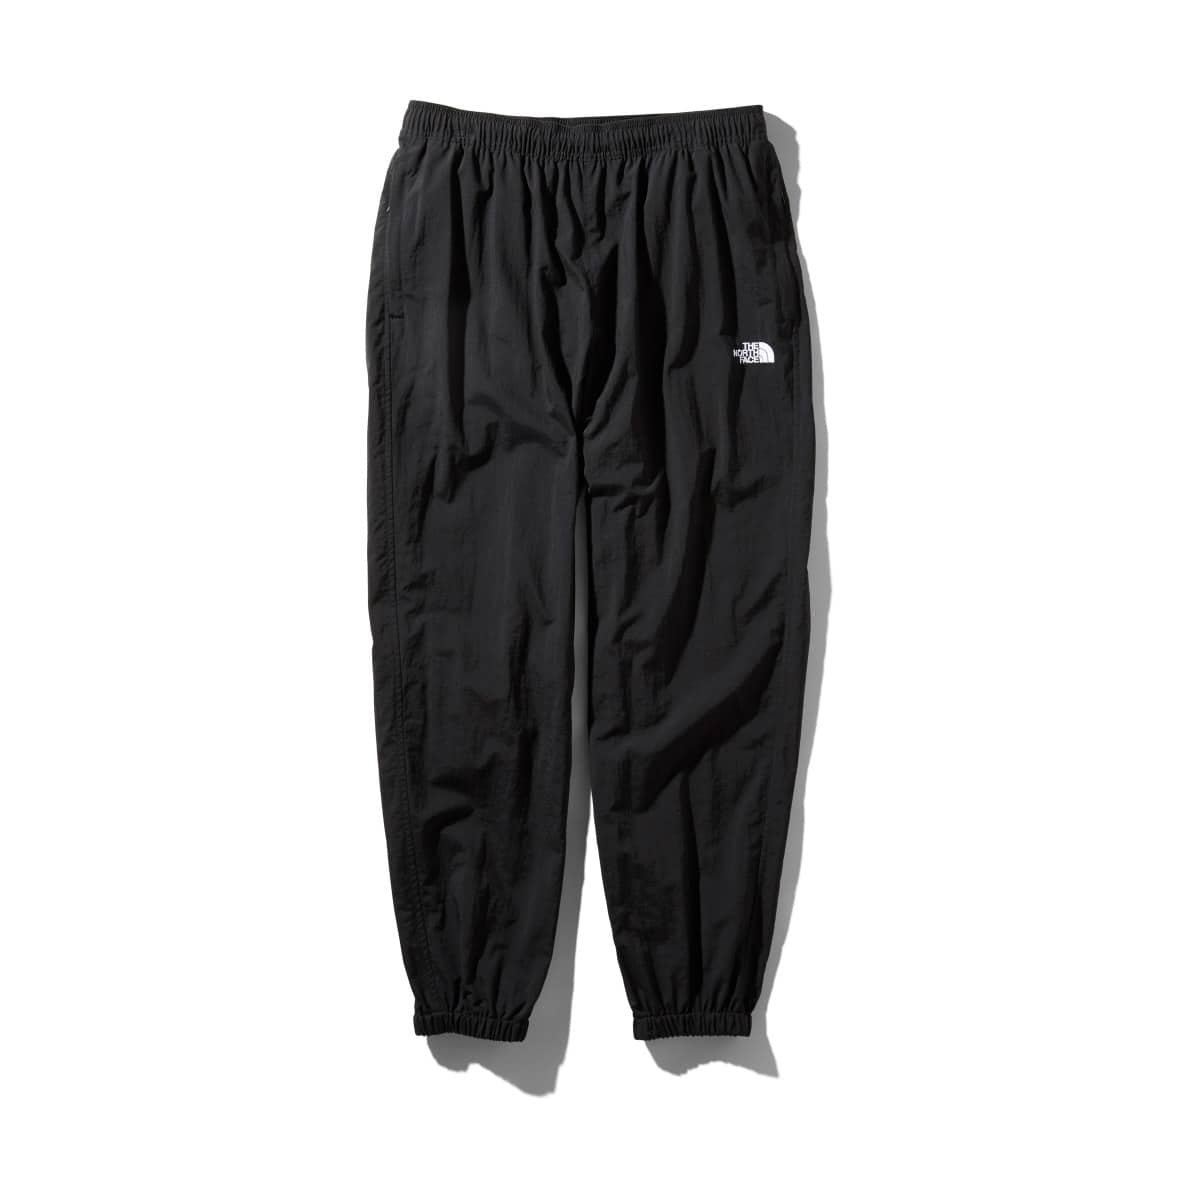 THE NORTH FACE VERSATILE PANT ブラック 24SS-I_photo_large